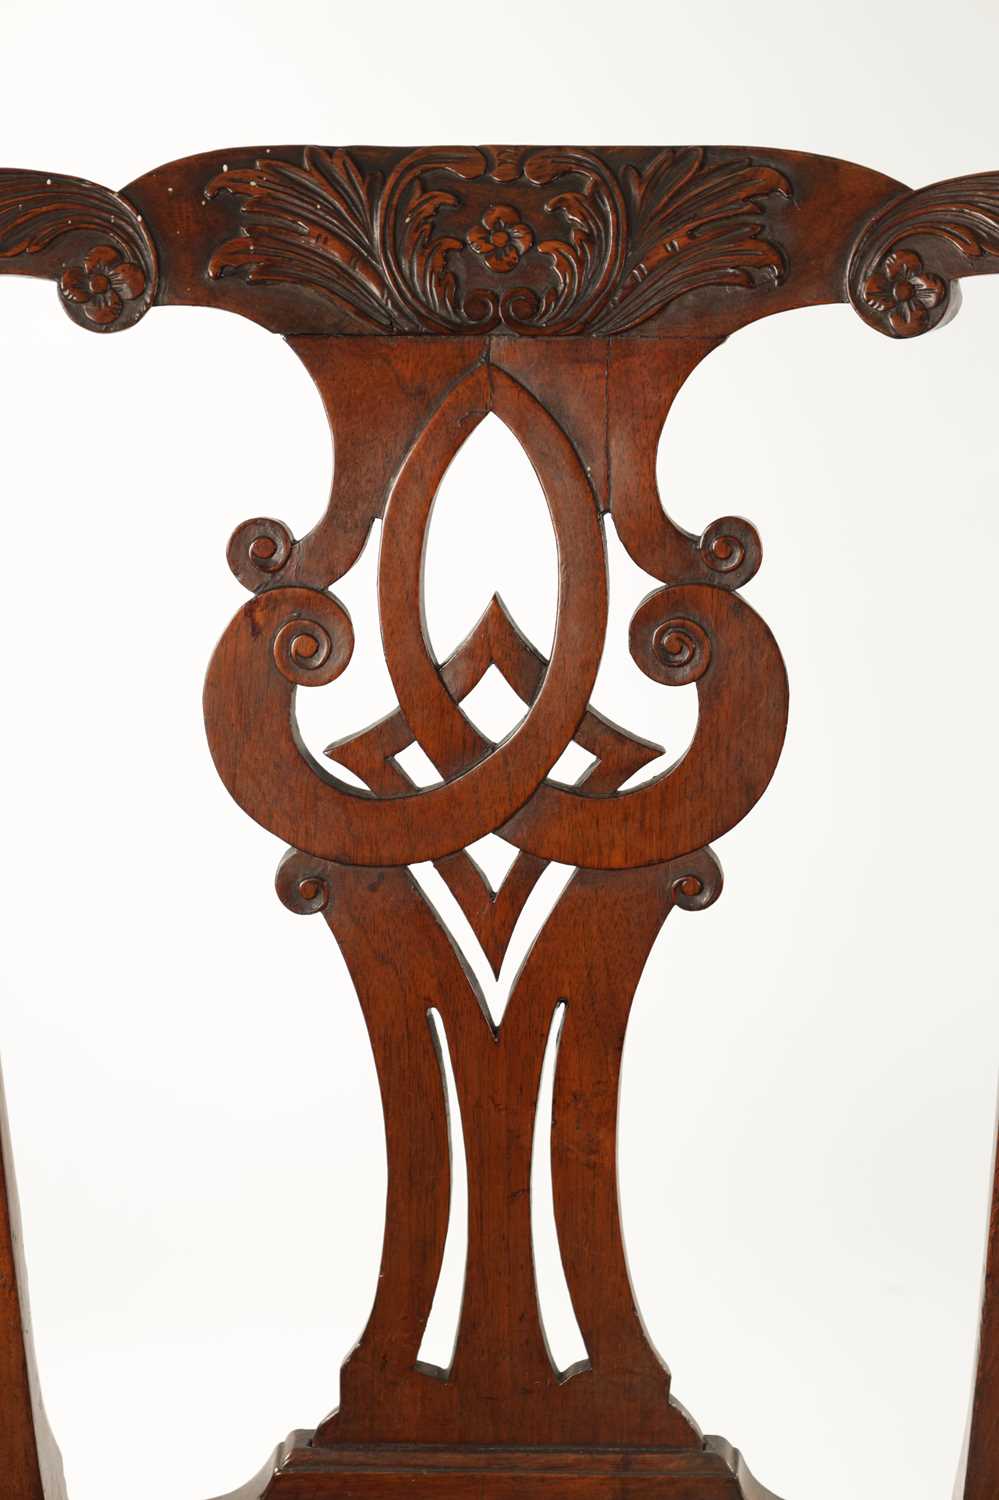 A GOOD PAIR OF MID 18TH CENTURY WALNUT SIDE CHAIRS - Image 4 of 10